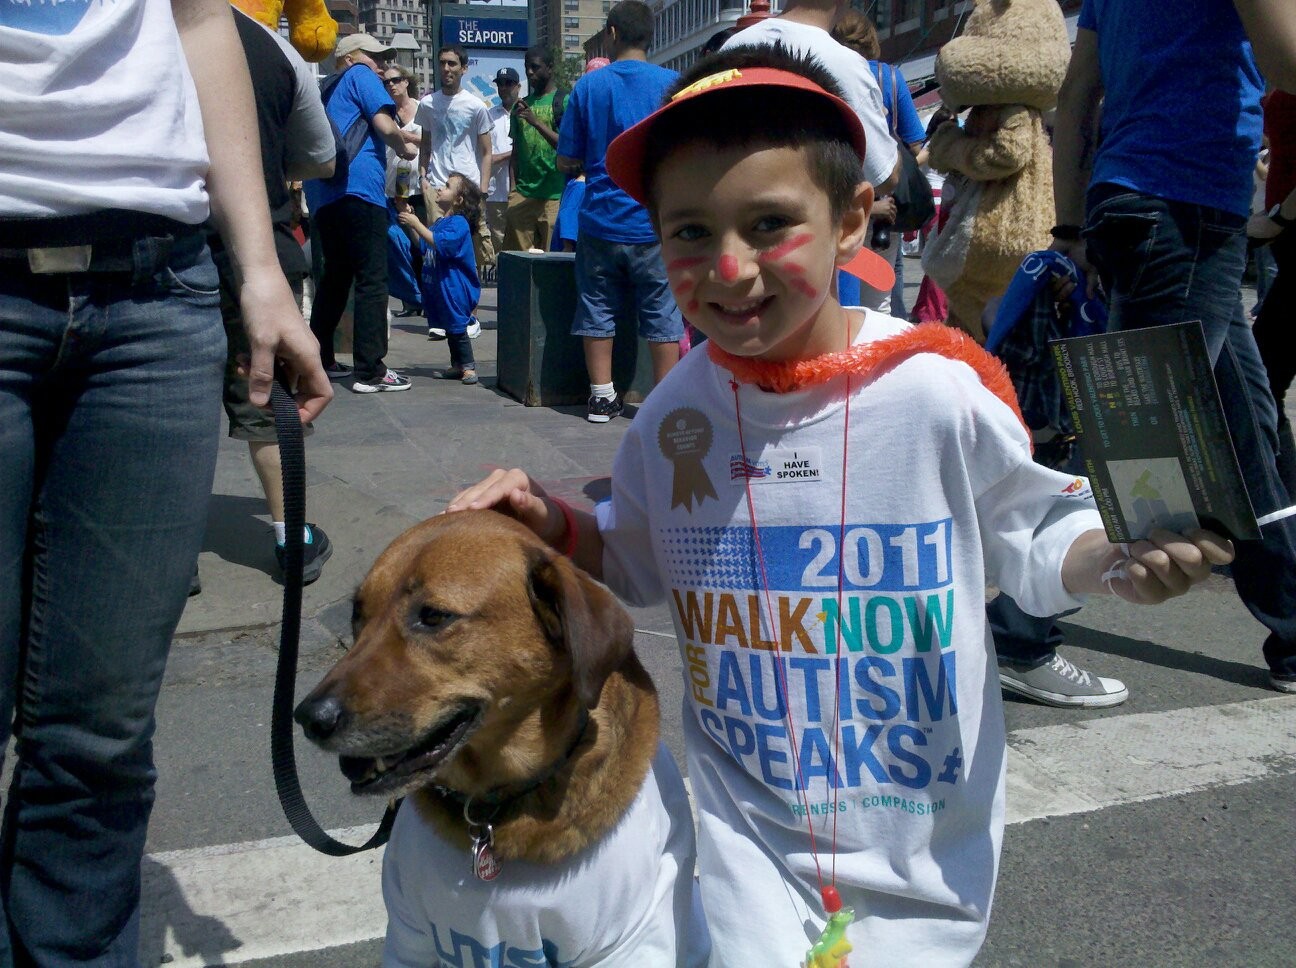 Alex Huertas, who wanted to make a difference for those in need, took part in an Autism Speaks fundraiser at the South Street Seaport in 2011.